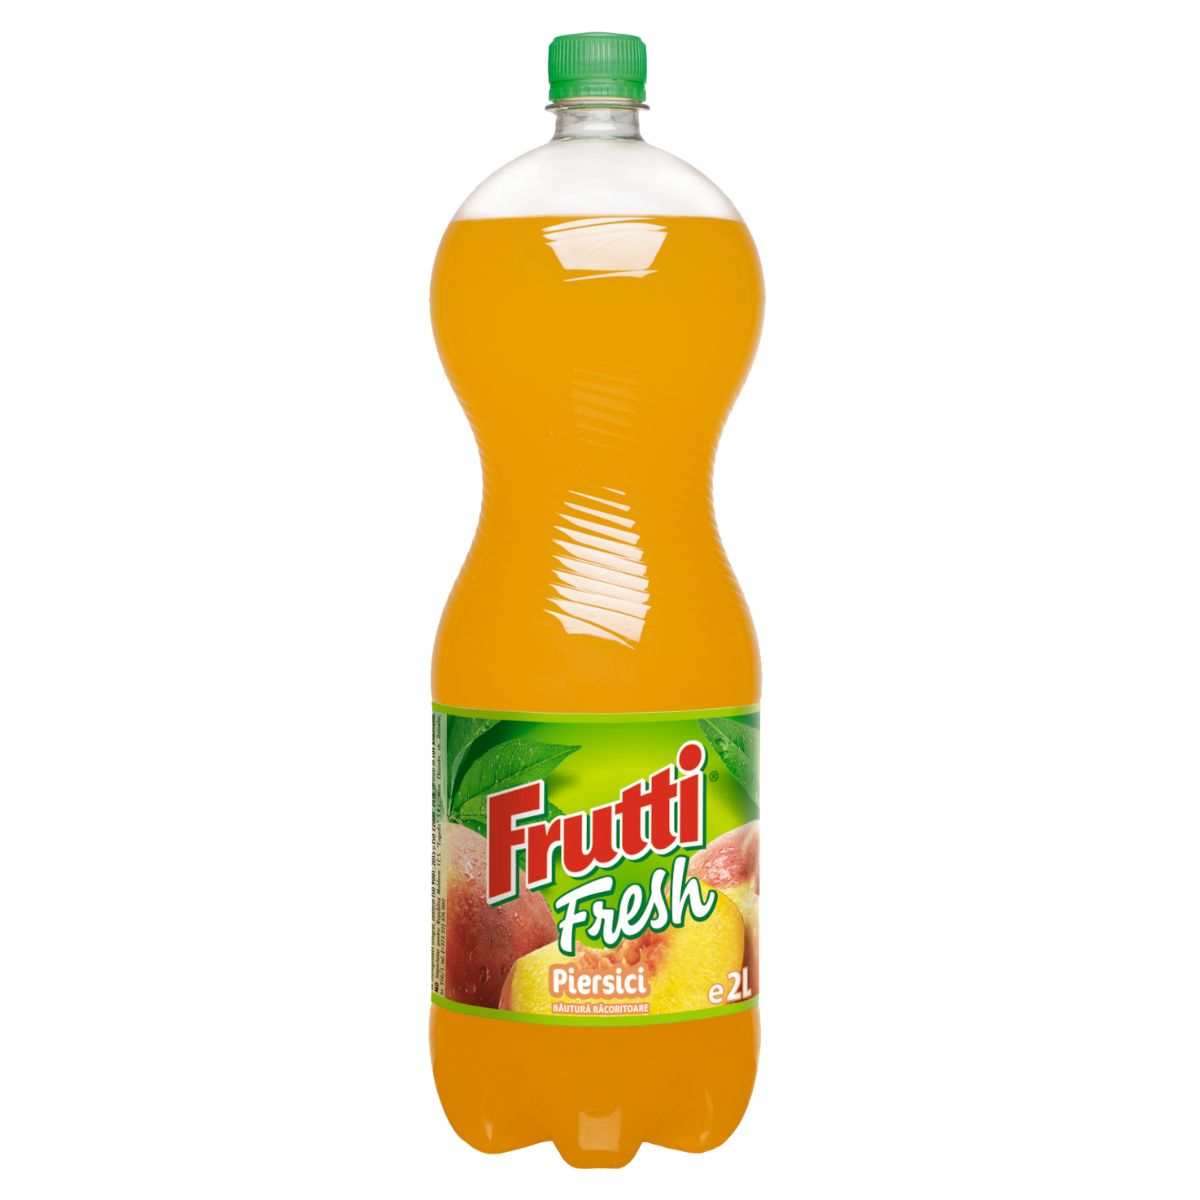 A bottle of Frutti Fresh - Peach Flavour Drink - 2L on a white background.